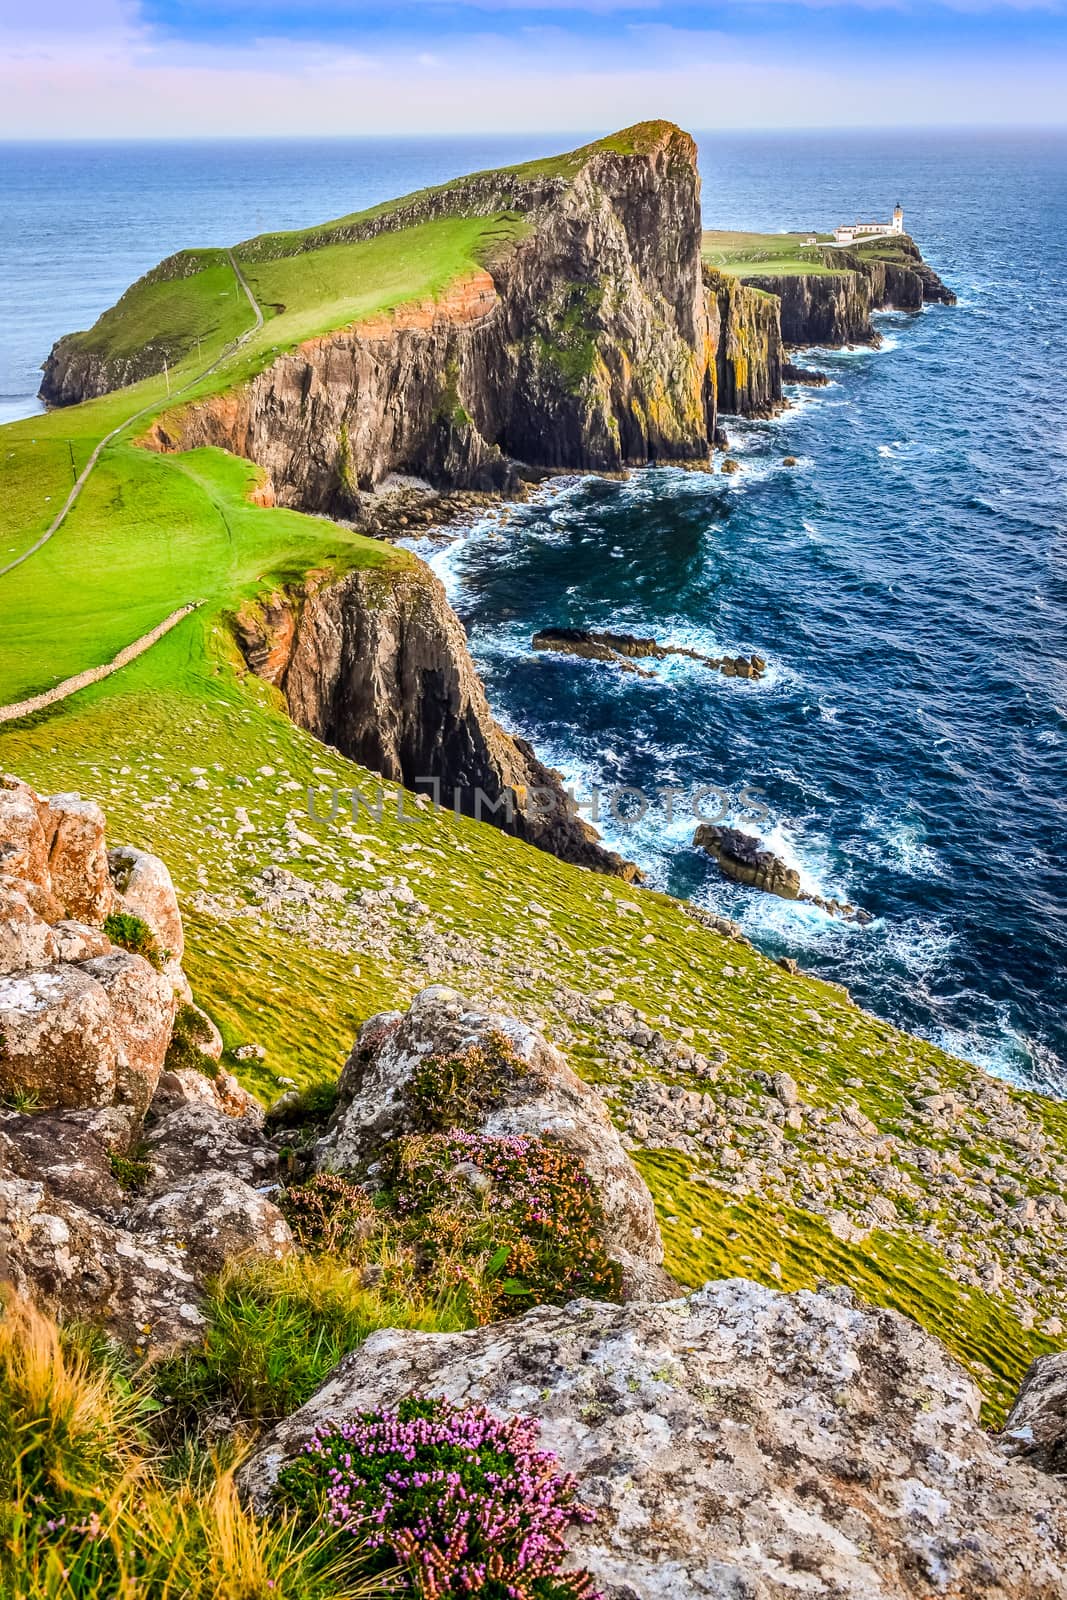 Vertical view of Neist Point lighthouse and rocky ocean coastline, Scotland, United Kingdom